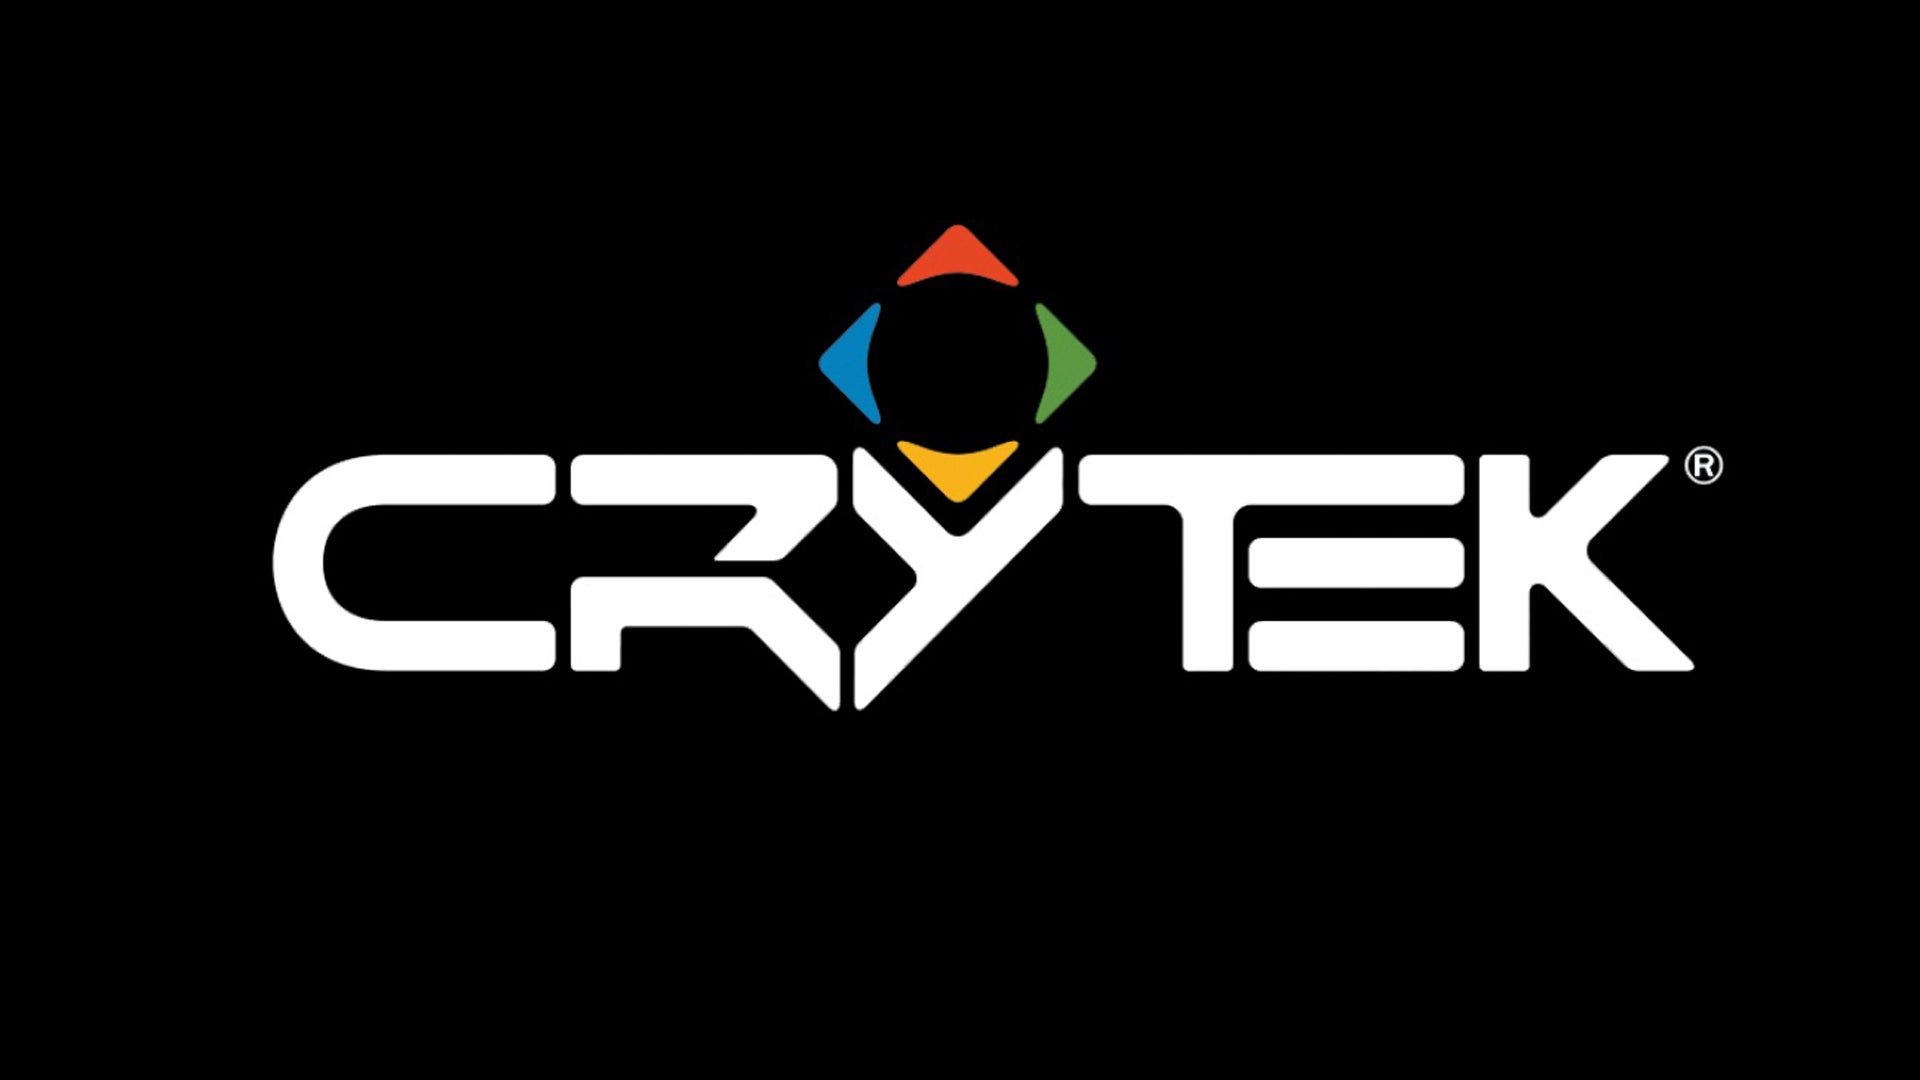 Image for Amazon signed licensing deal with Crytek for a lot of money - report